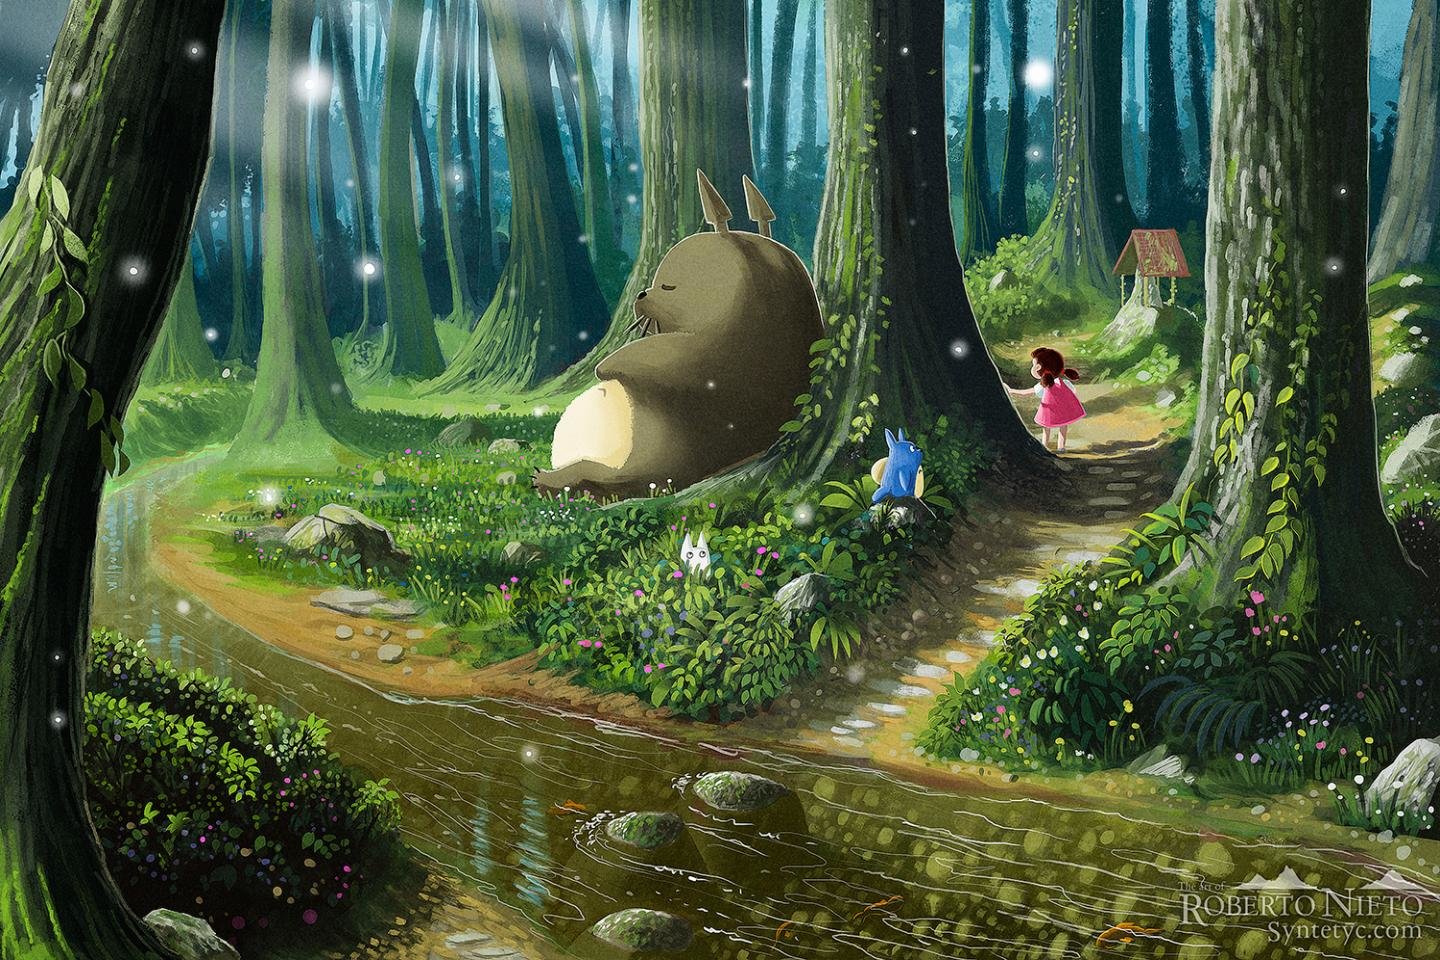 Free Download My Neighbor Totoro Wallpaper Id 259371 Hd 1440x960 Images, Photos, Reviews